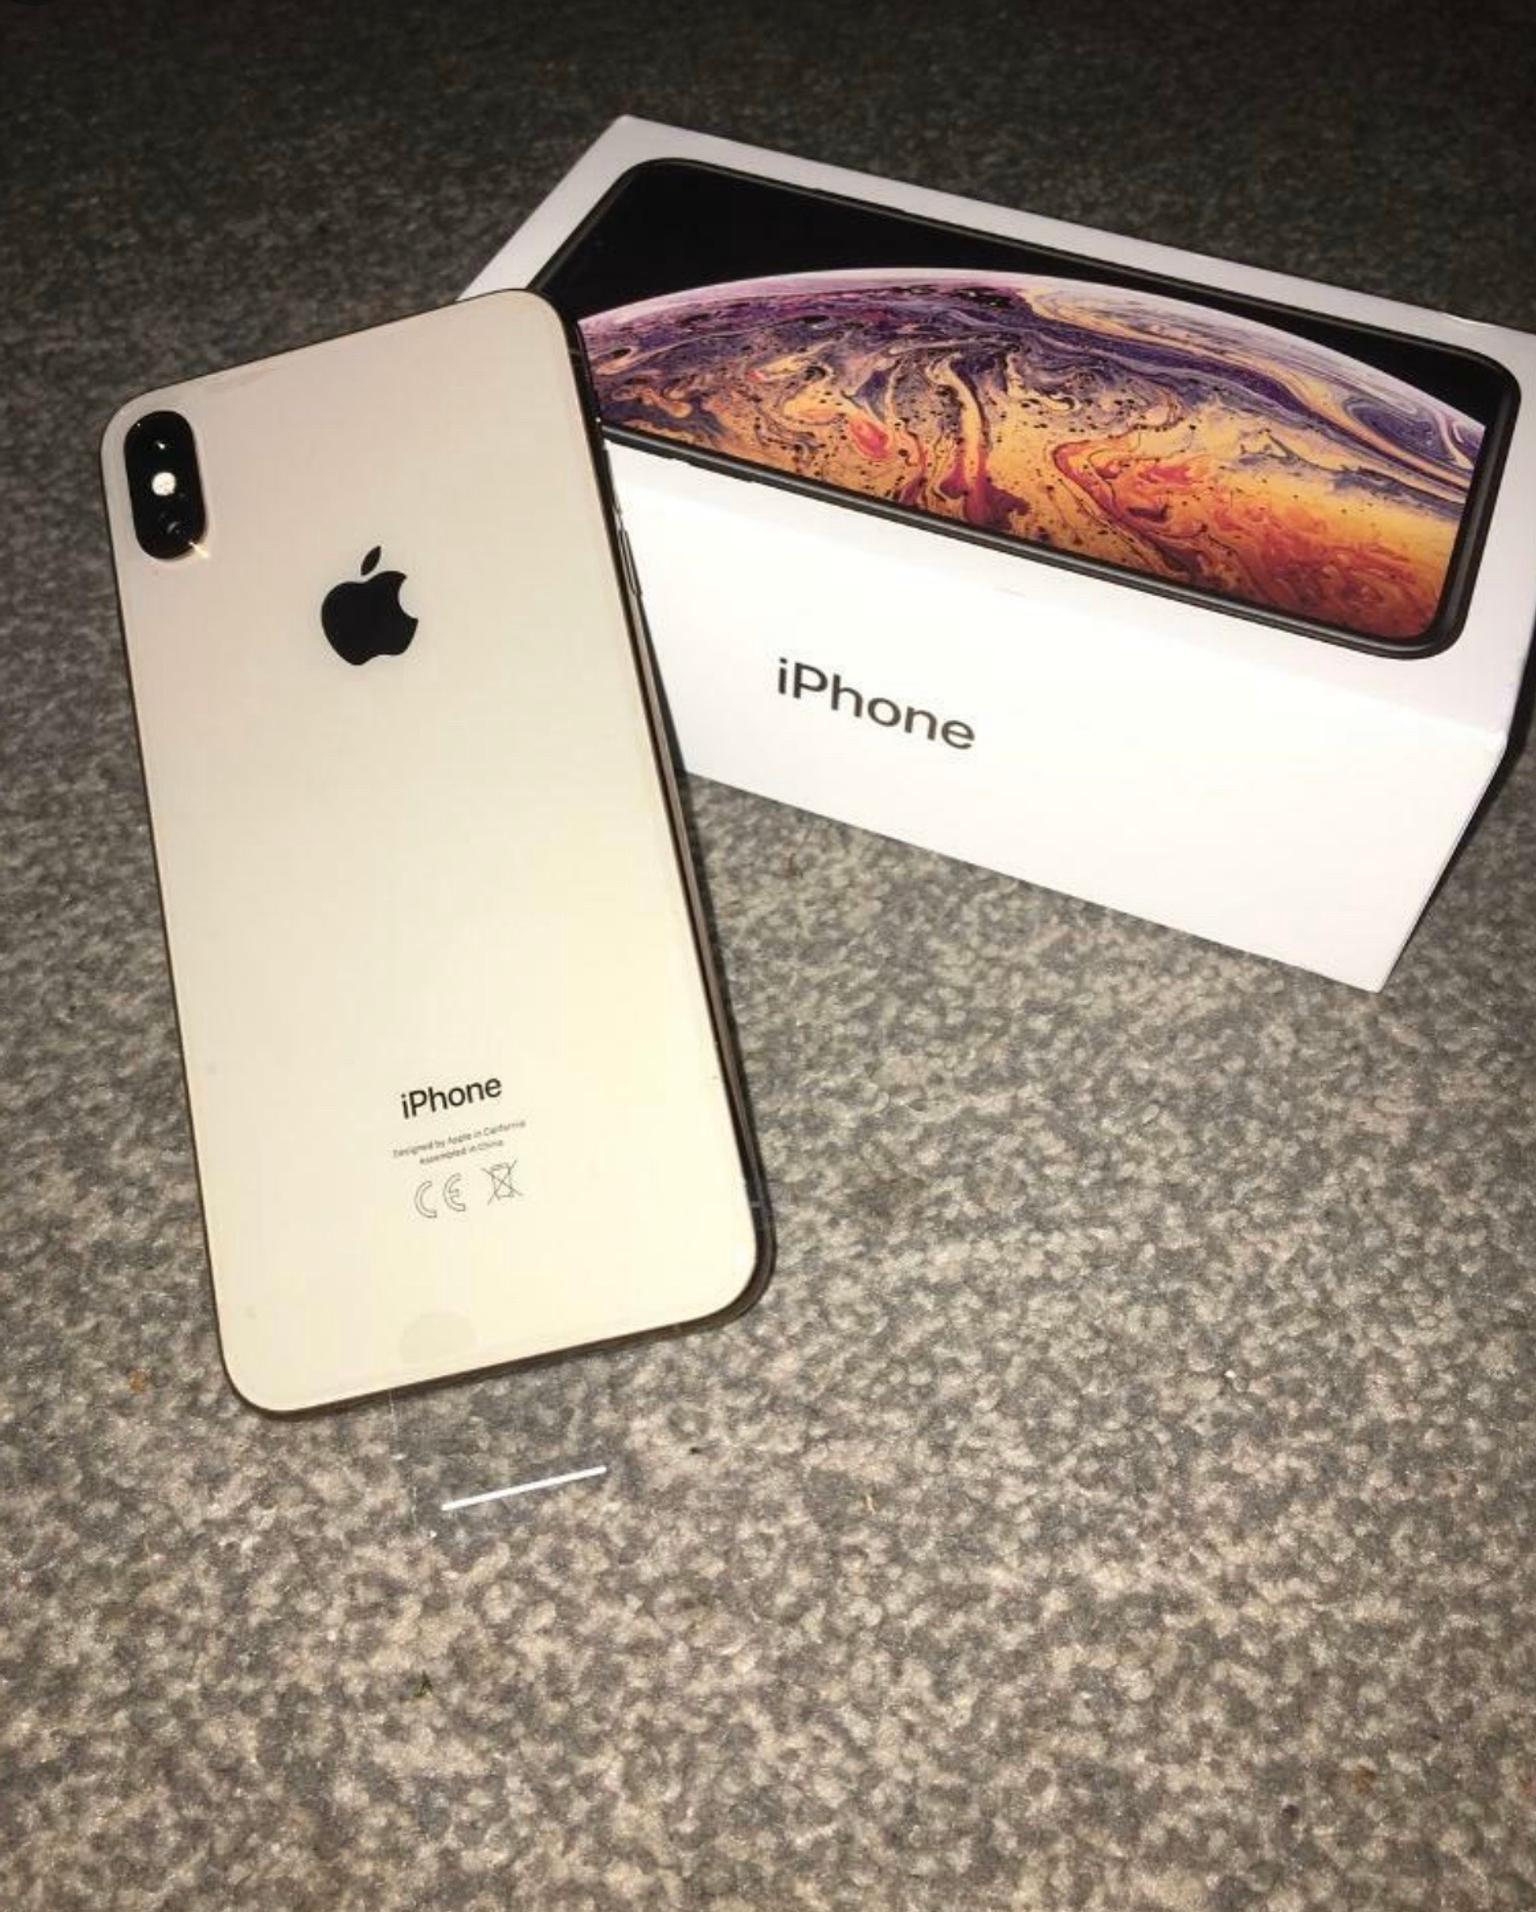 IPHONE XS MAX ROSE GOLD in 77021 Houston for US$500.00 for sale | Shpock